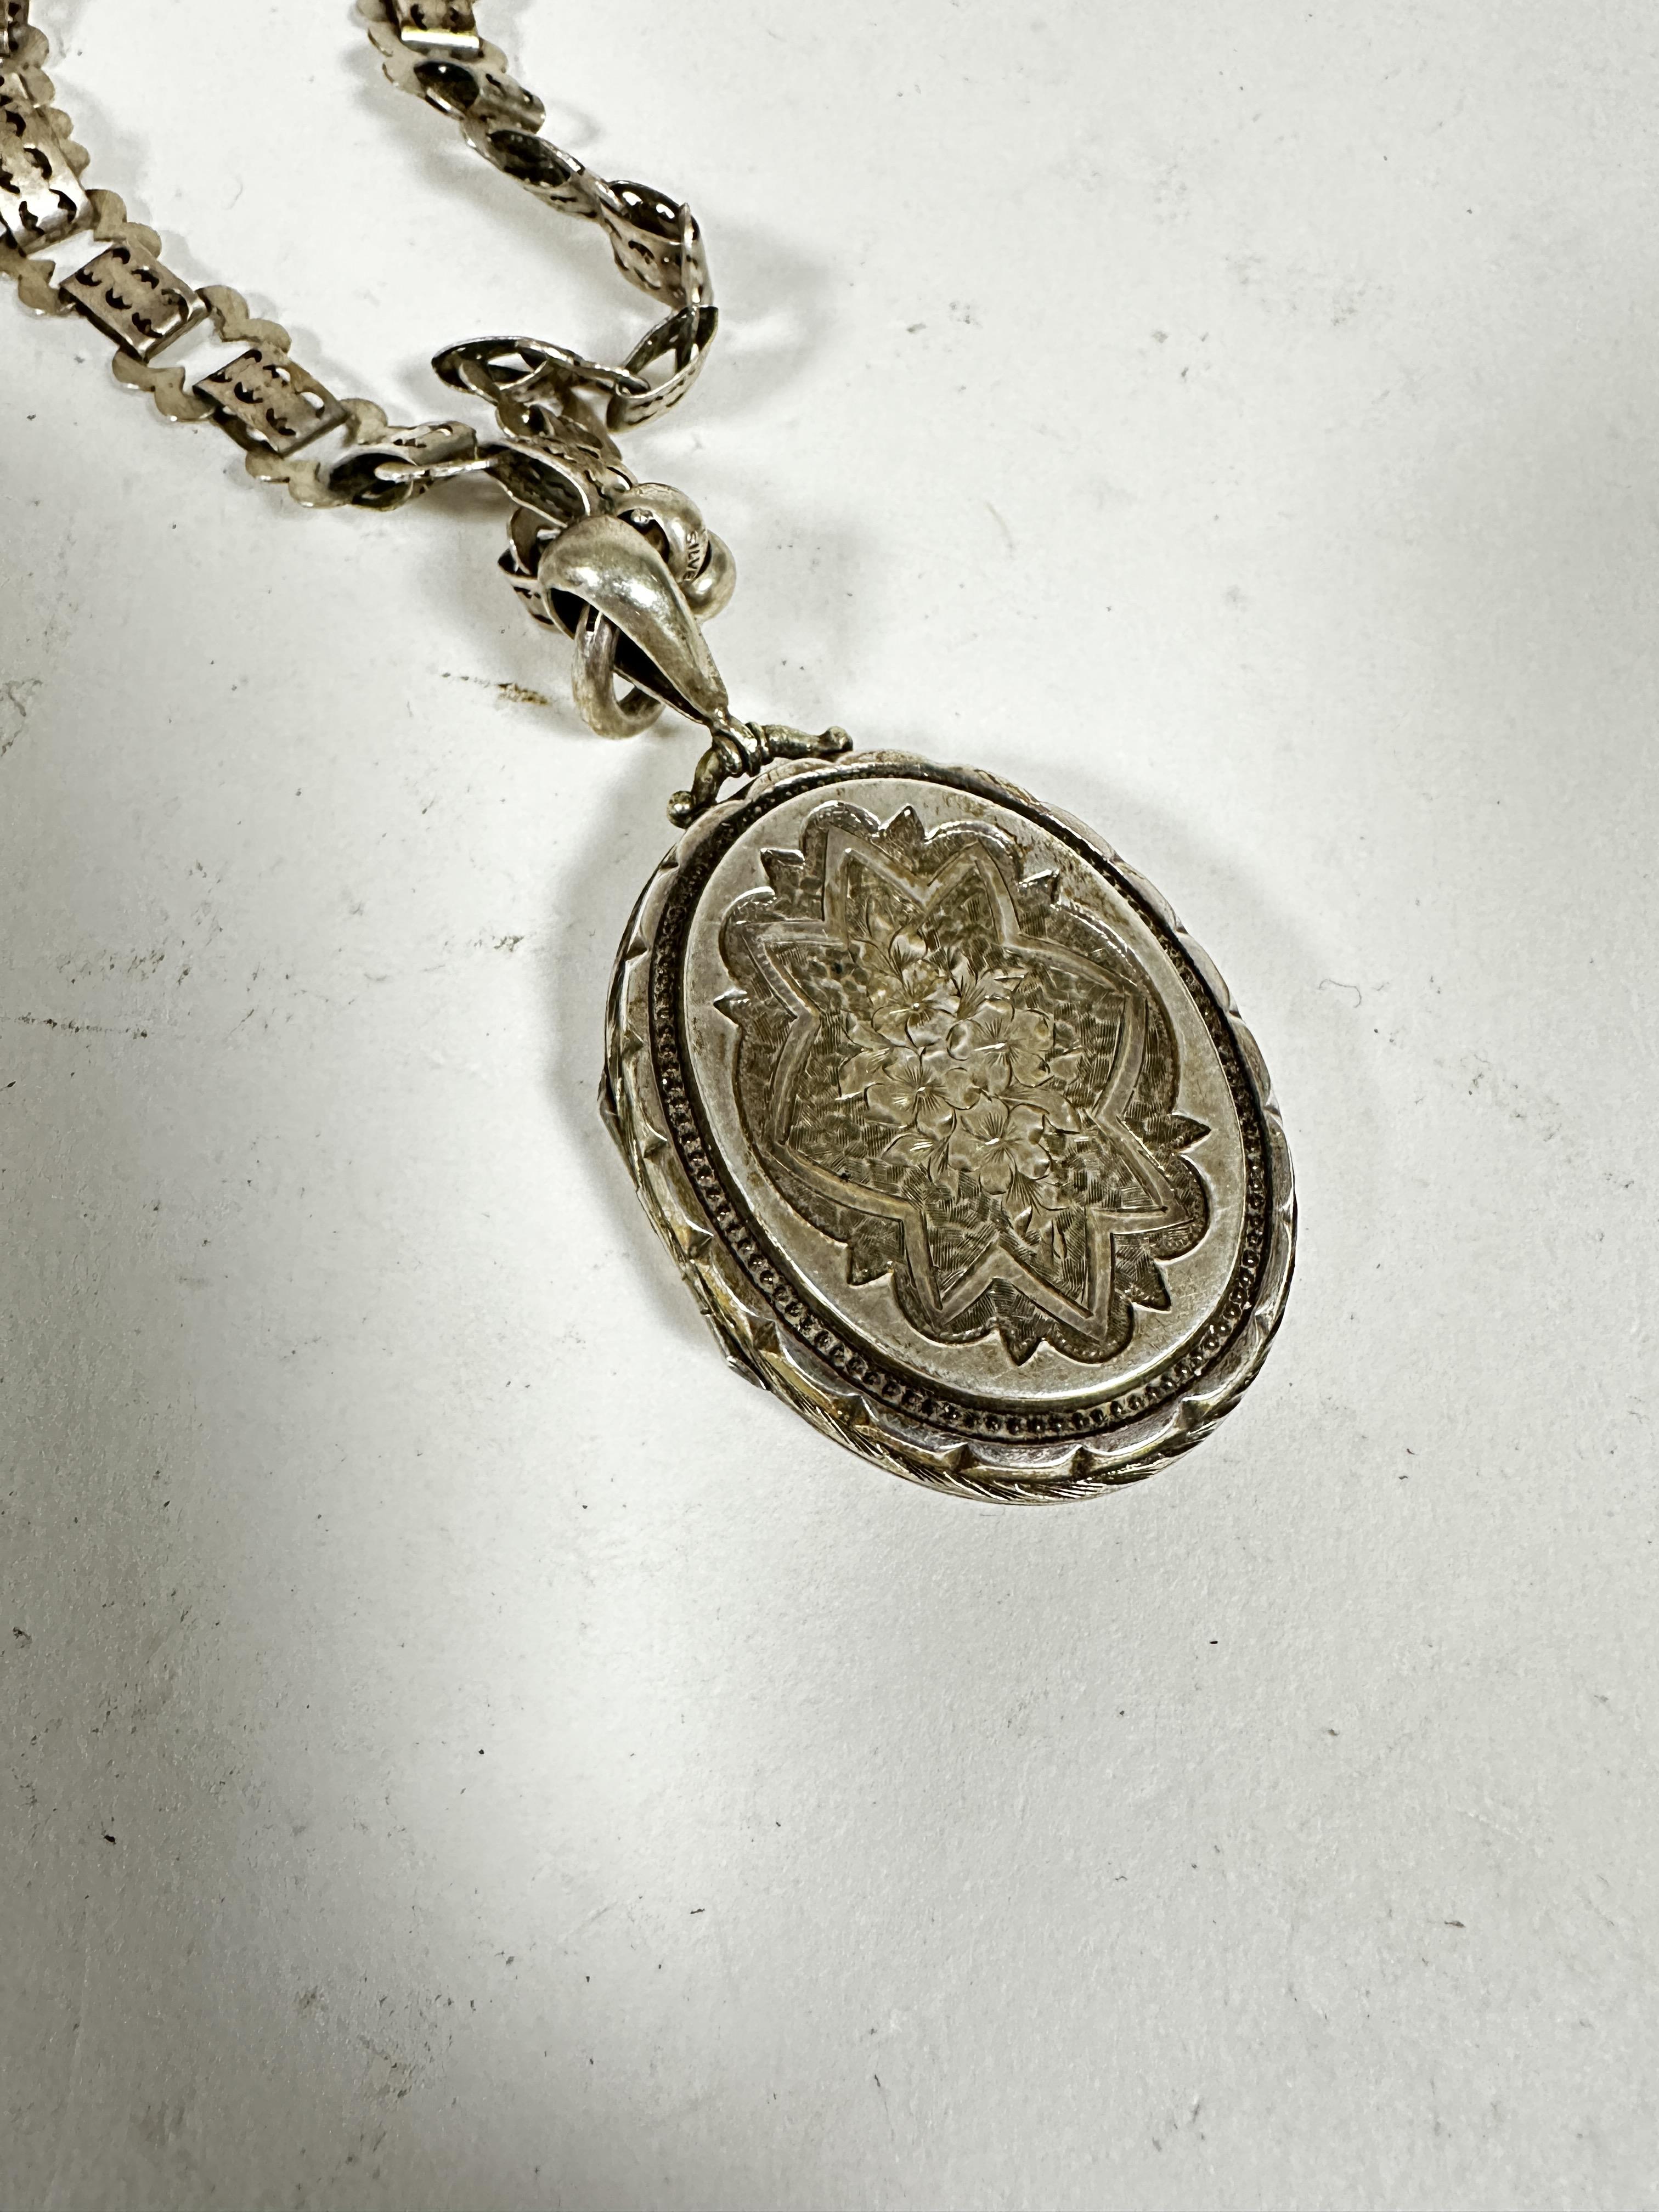 A Victorian oval white metal locket with engraved decoration and gadroon border mounted on white - Image 3 of 3